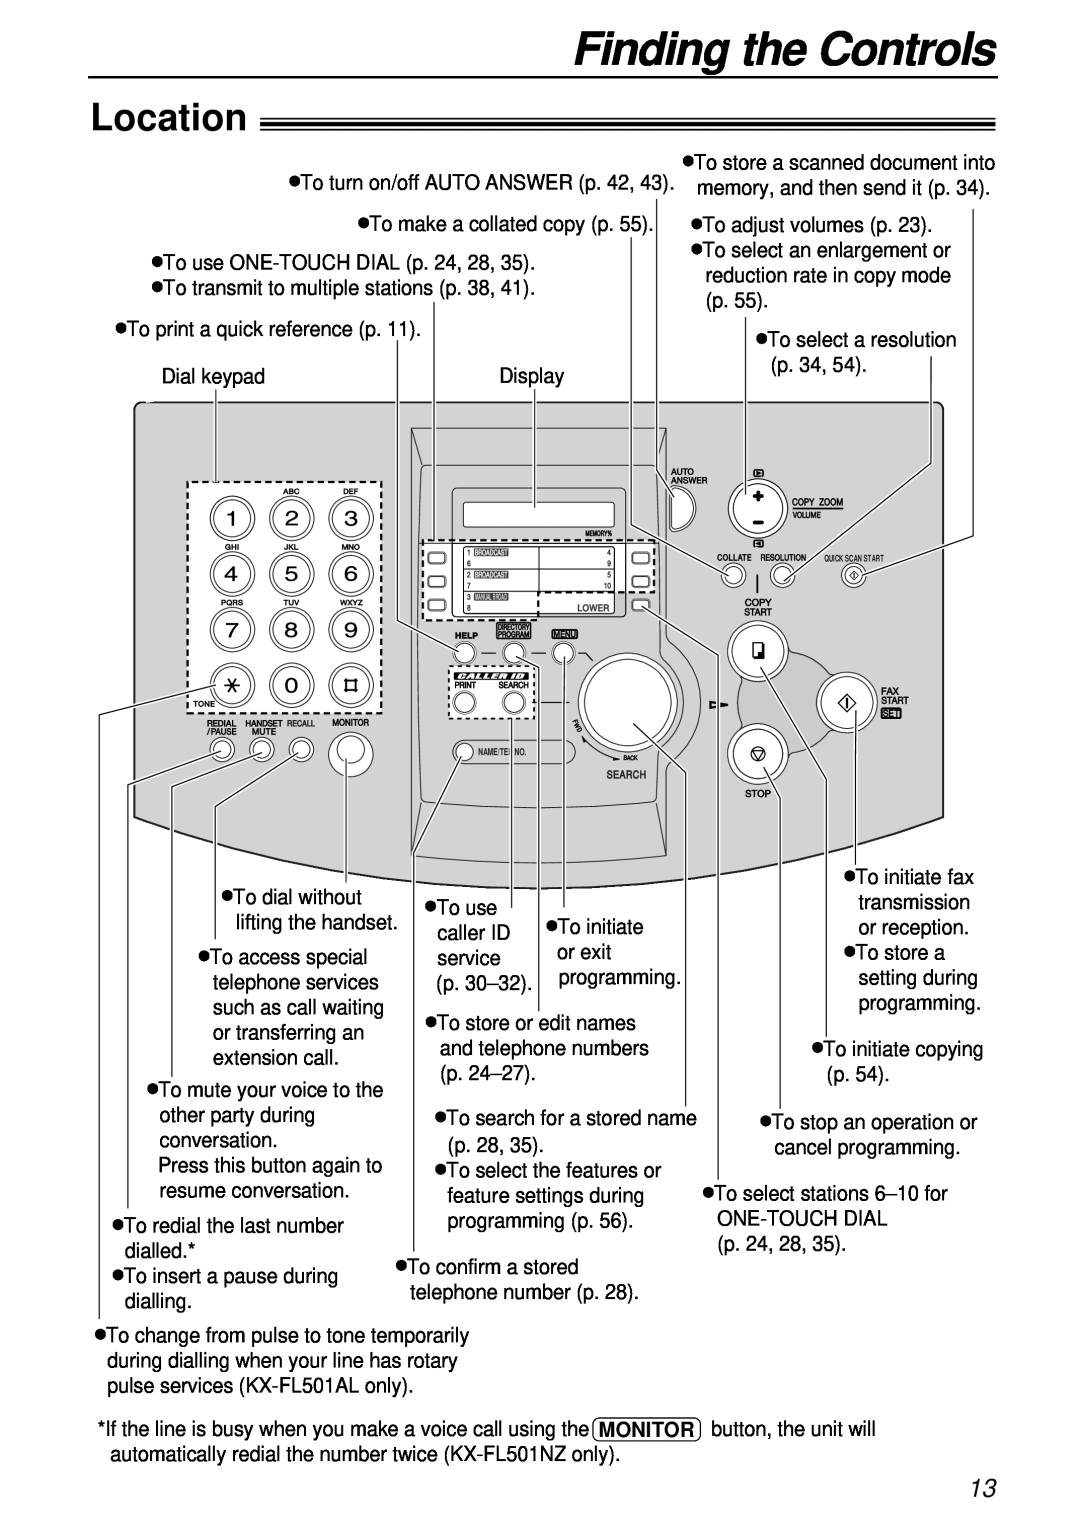 Panasonic KX-FL501NZ Location, Finding the Controls, To store a scanned document into, memory, and then send it p, p. 28 